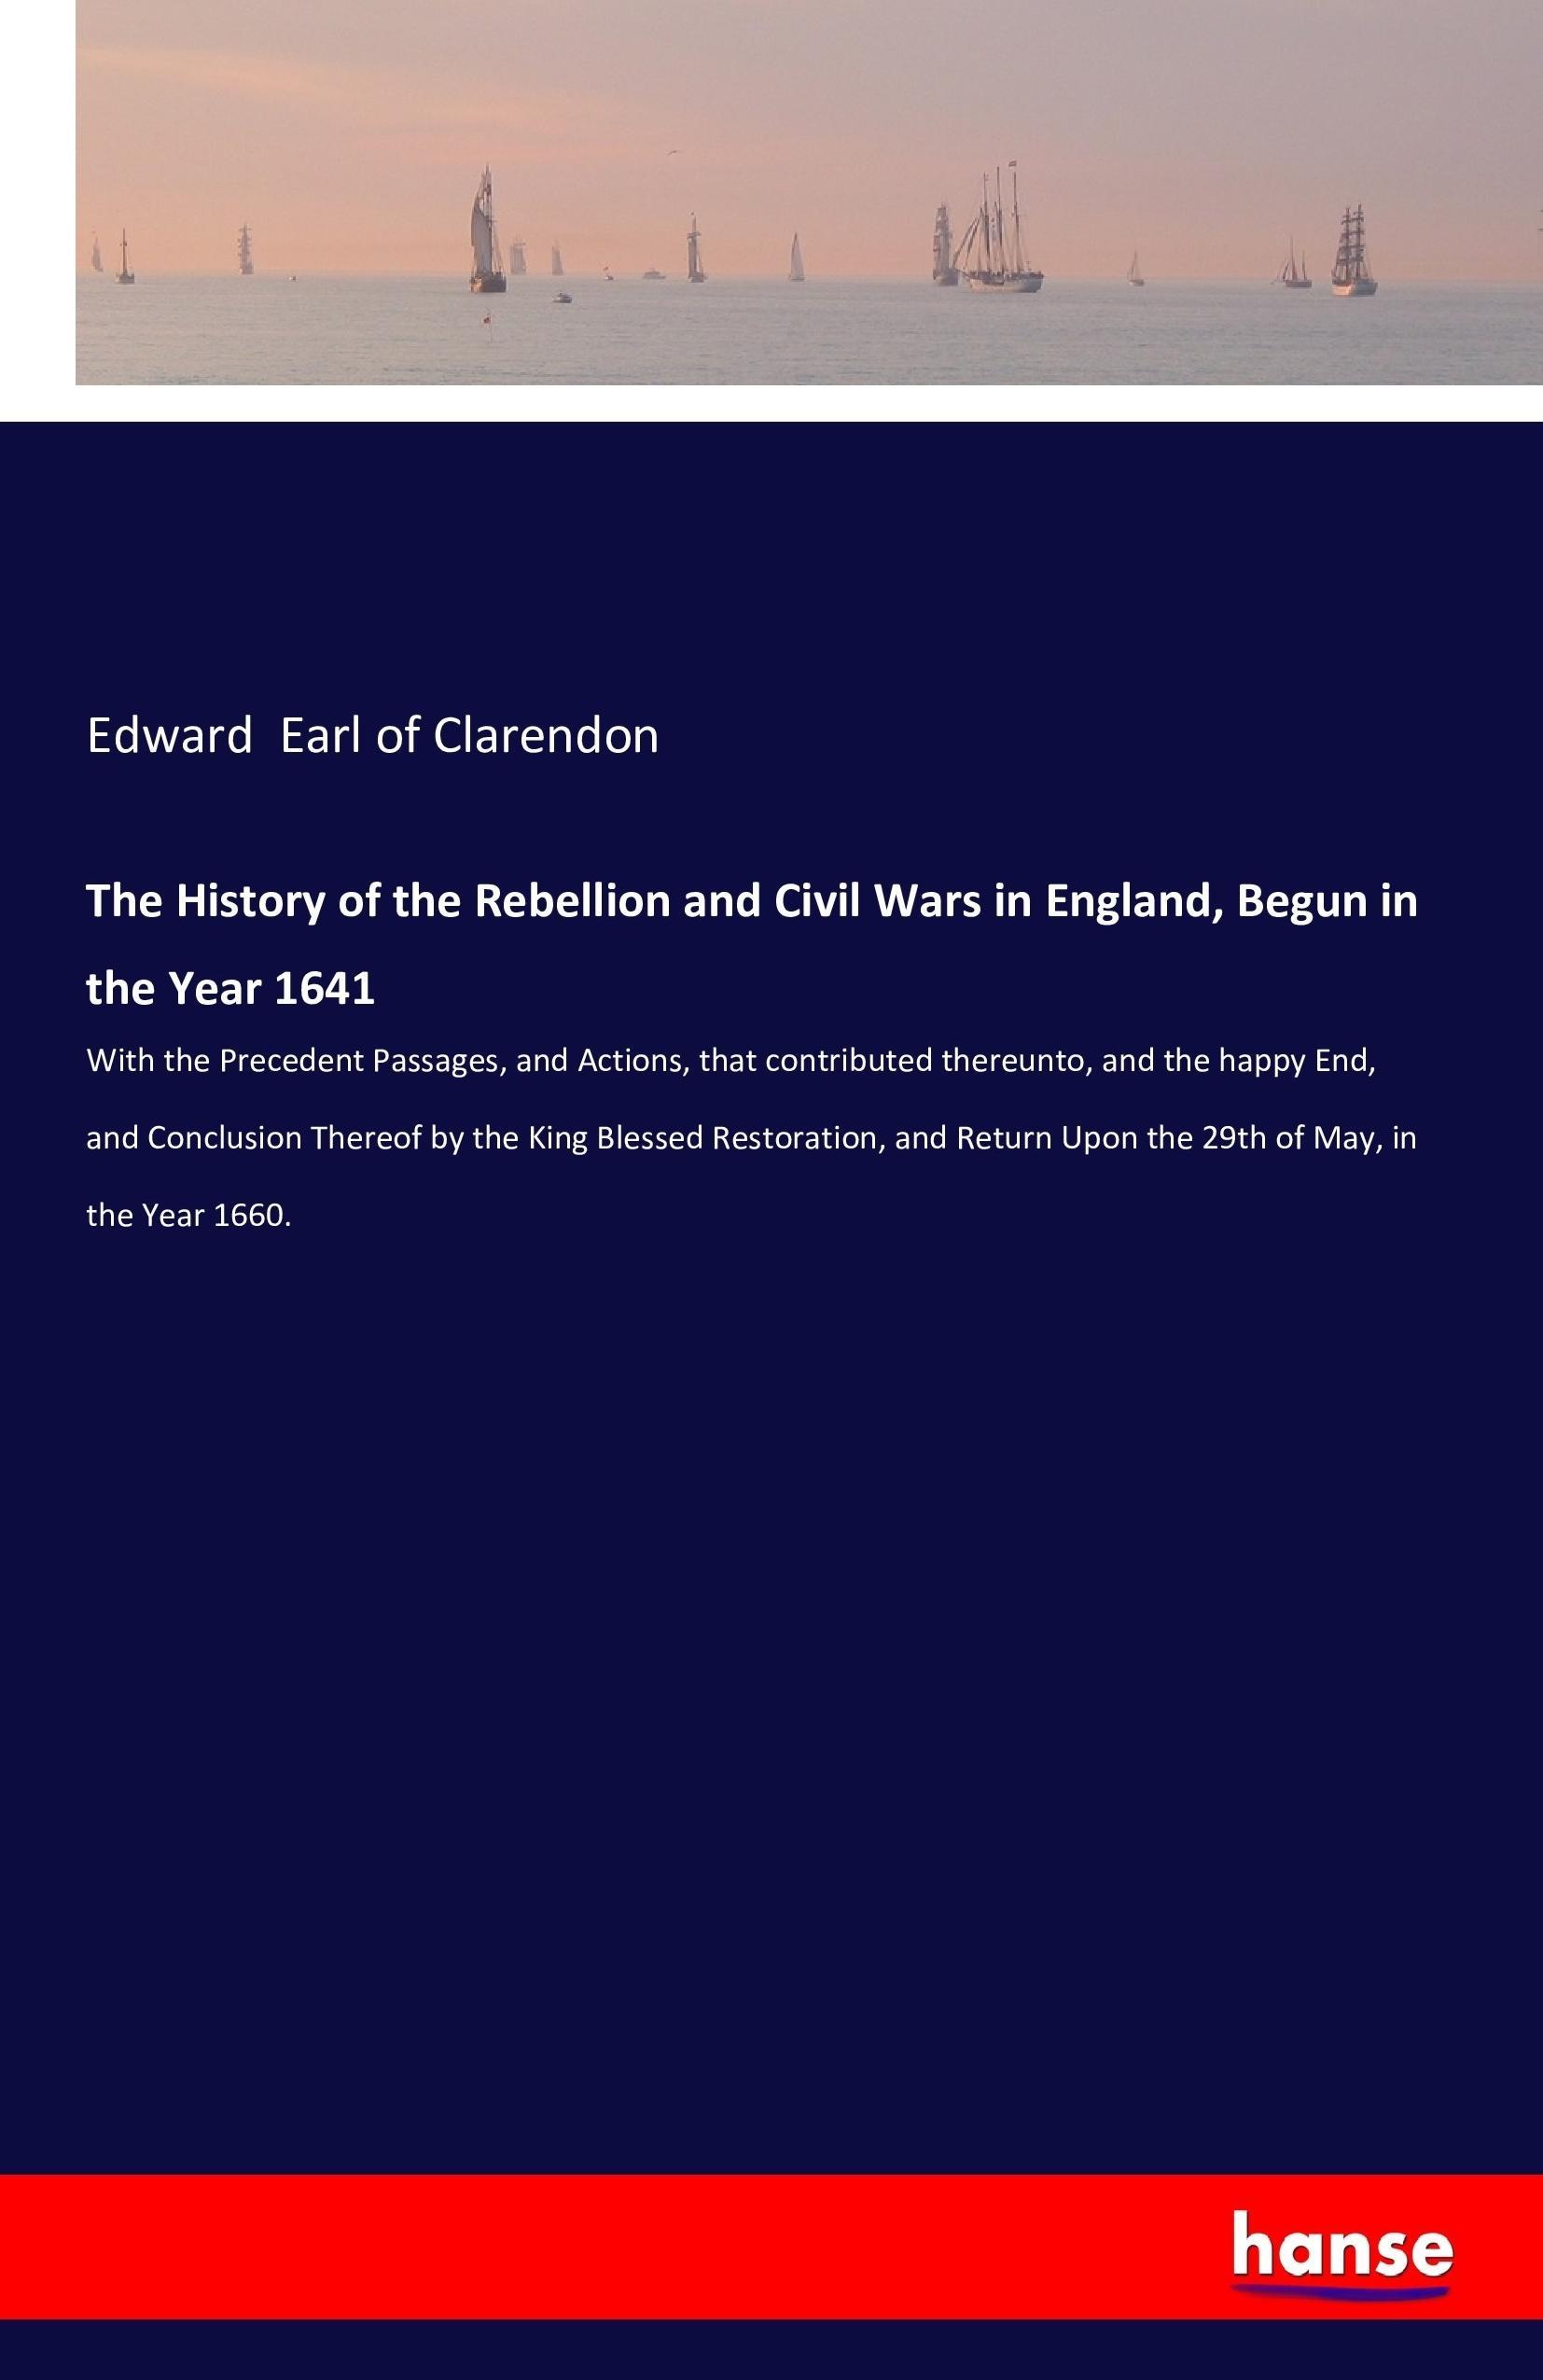 The History of the Rebellion and Civil Wars in England, Begun in the Year 1641 - Hyde, Edward (Earl of Clarendon)